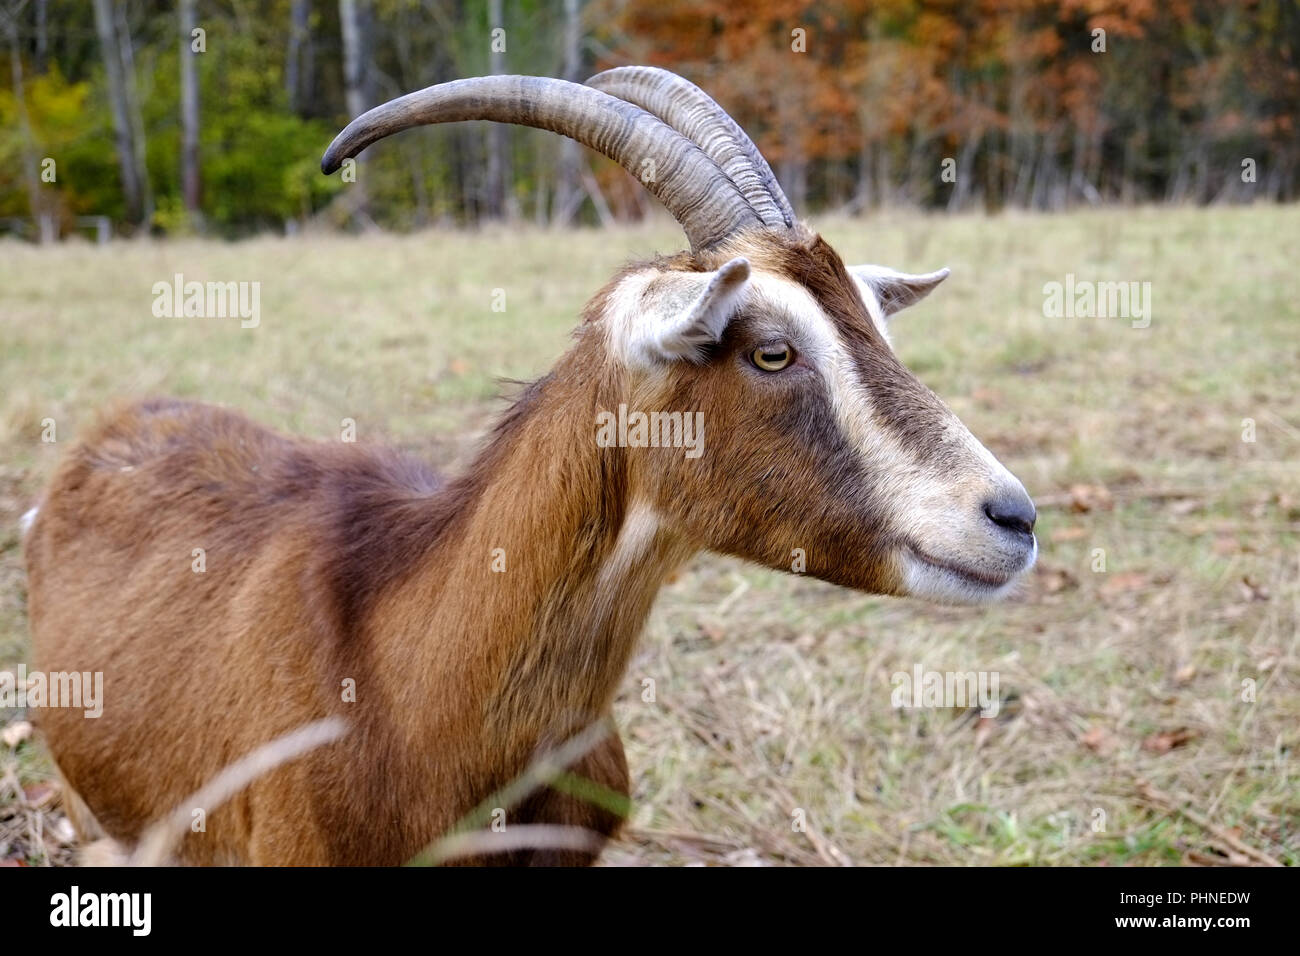 Goat with long horns Stock Photo